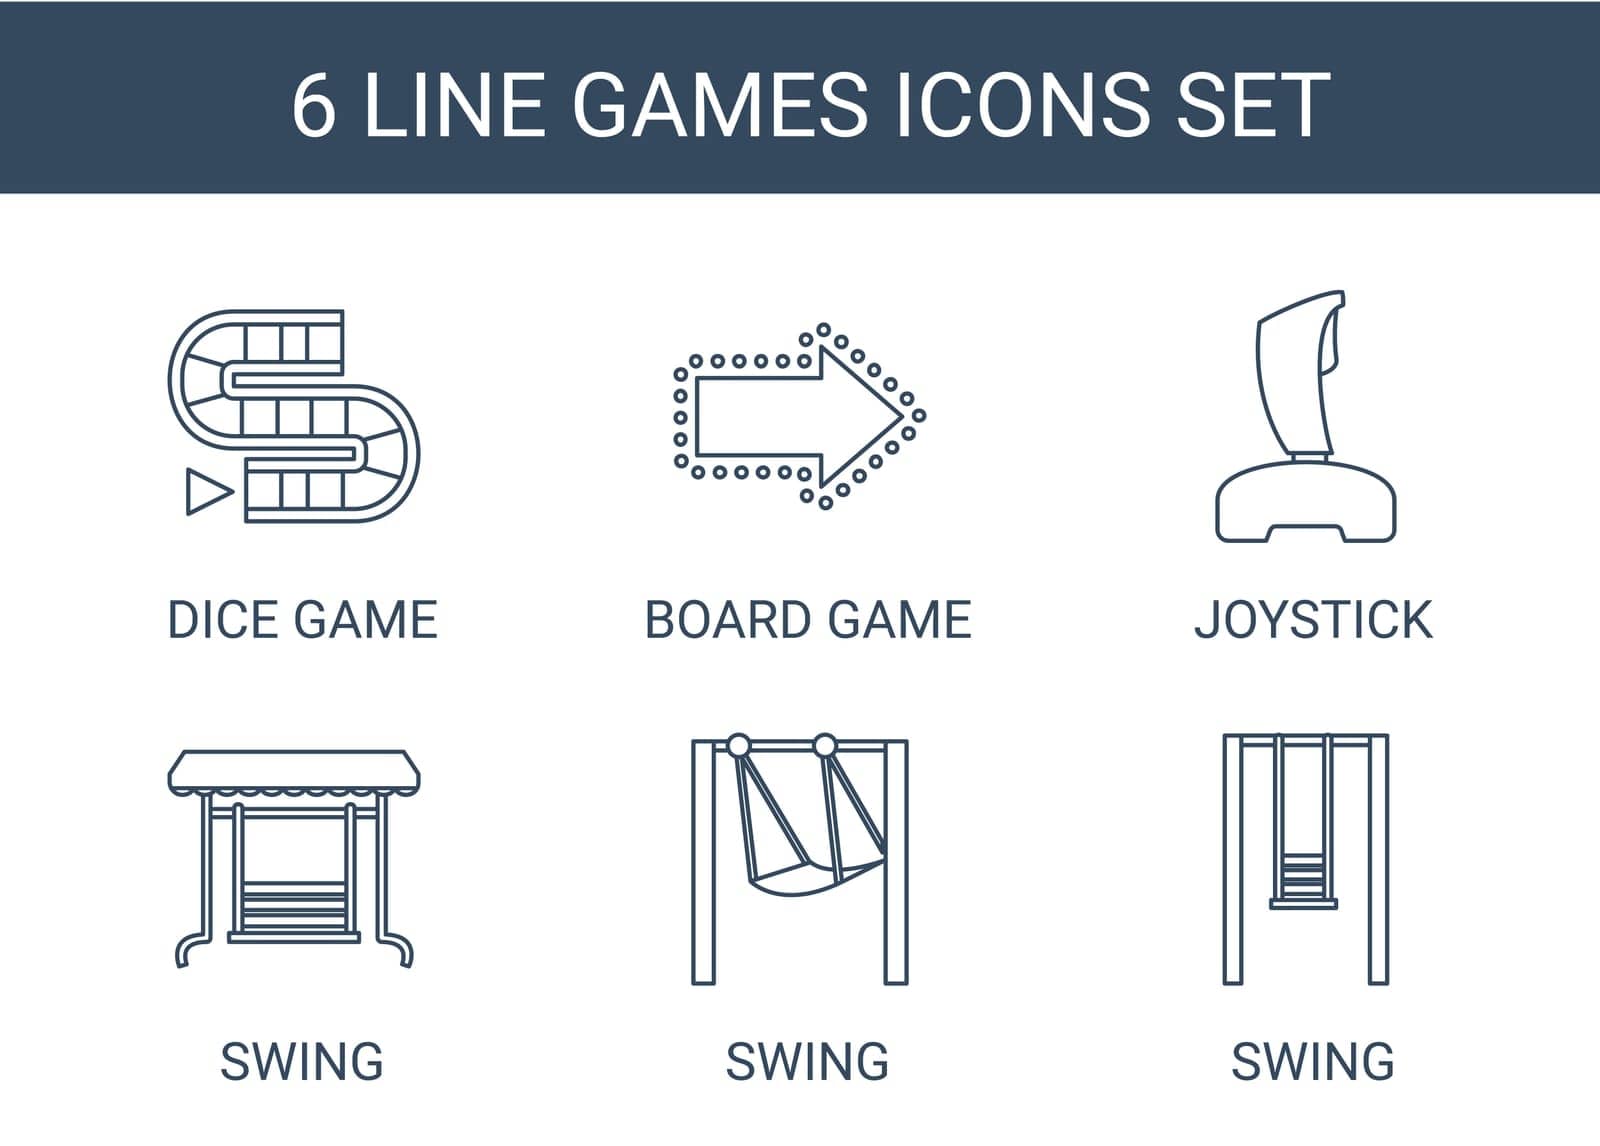 play,symbol,game,kid,icon,dice,isolated,back,video,button,white,furniture,flat,design,games,drawing,playground,vector,leisure,graphic,image,art,chess,set,black,joystick,girl,seat,outdoor,swing,painting,background,silhouette,sing,playing,illustration,swinging,fun,board,object by ogqcorp